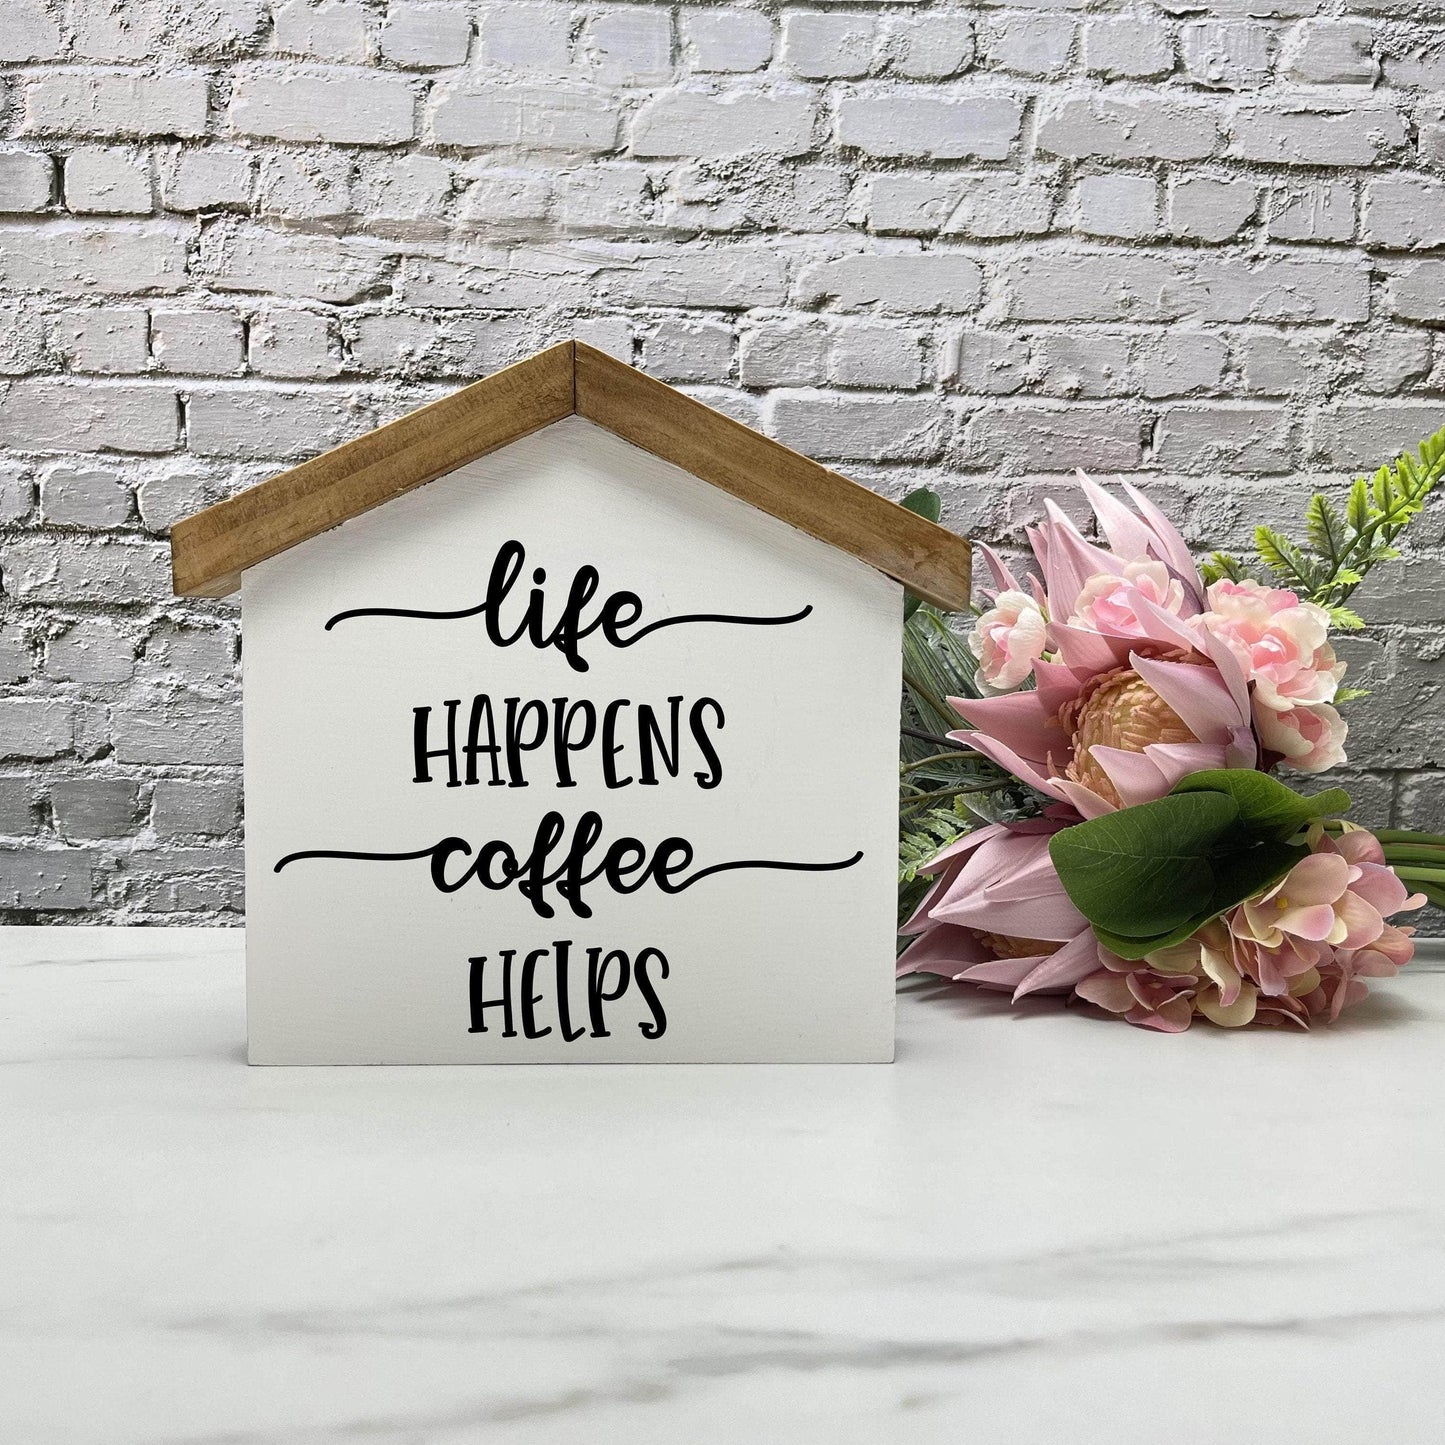 Life happens, coffee helps Kitchen house wood sign decor